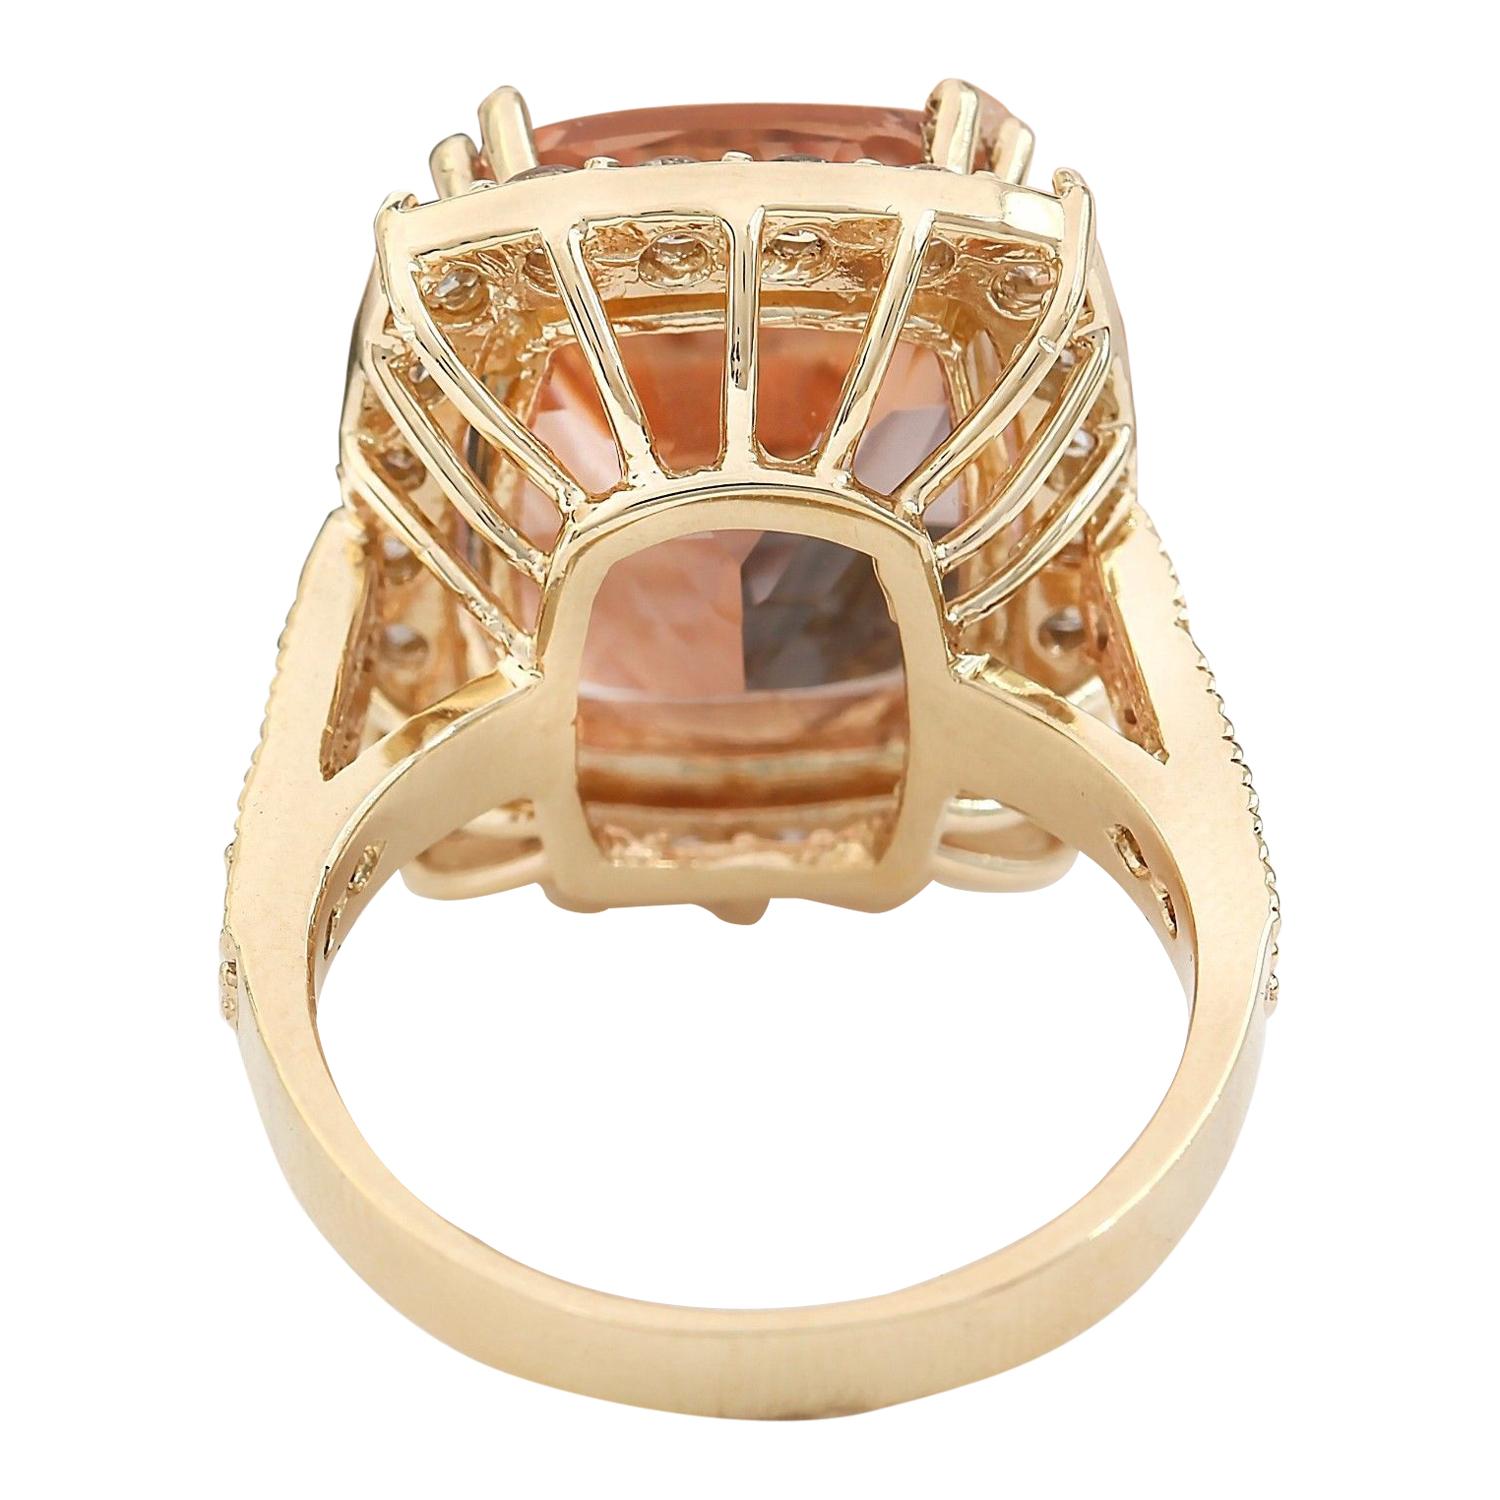 Cushion Cut Exquisite Natural Morganite Diamond Ring In 14 Karat Solid Yellow Gold  For Sale